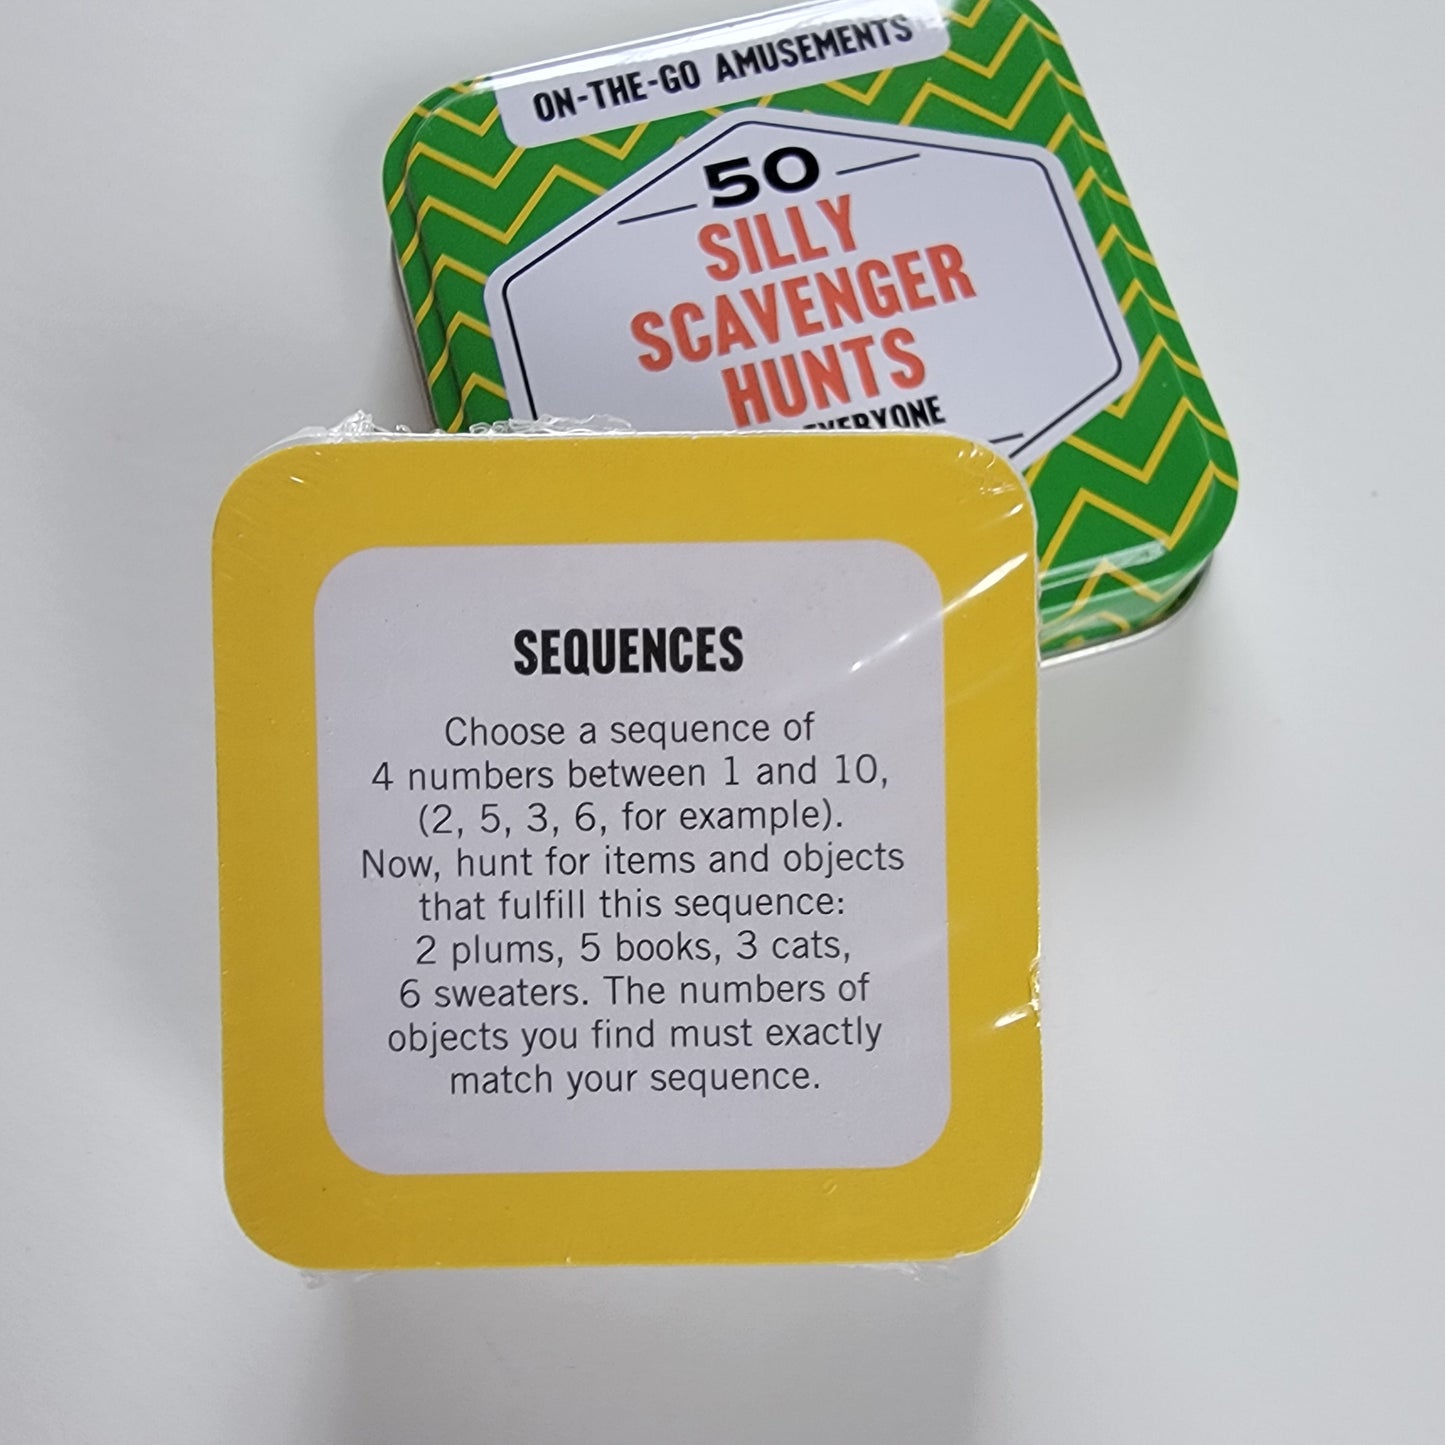 On The Go Amusements - 50 Silly Scavenger Hunts for Everyone